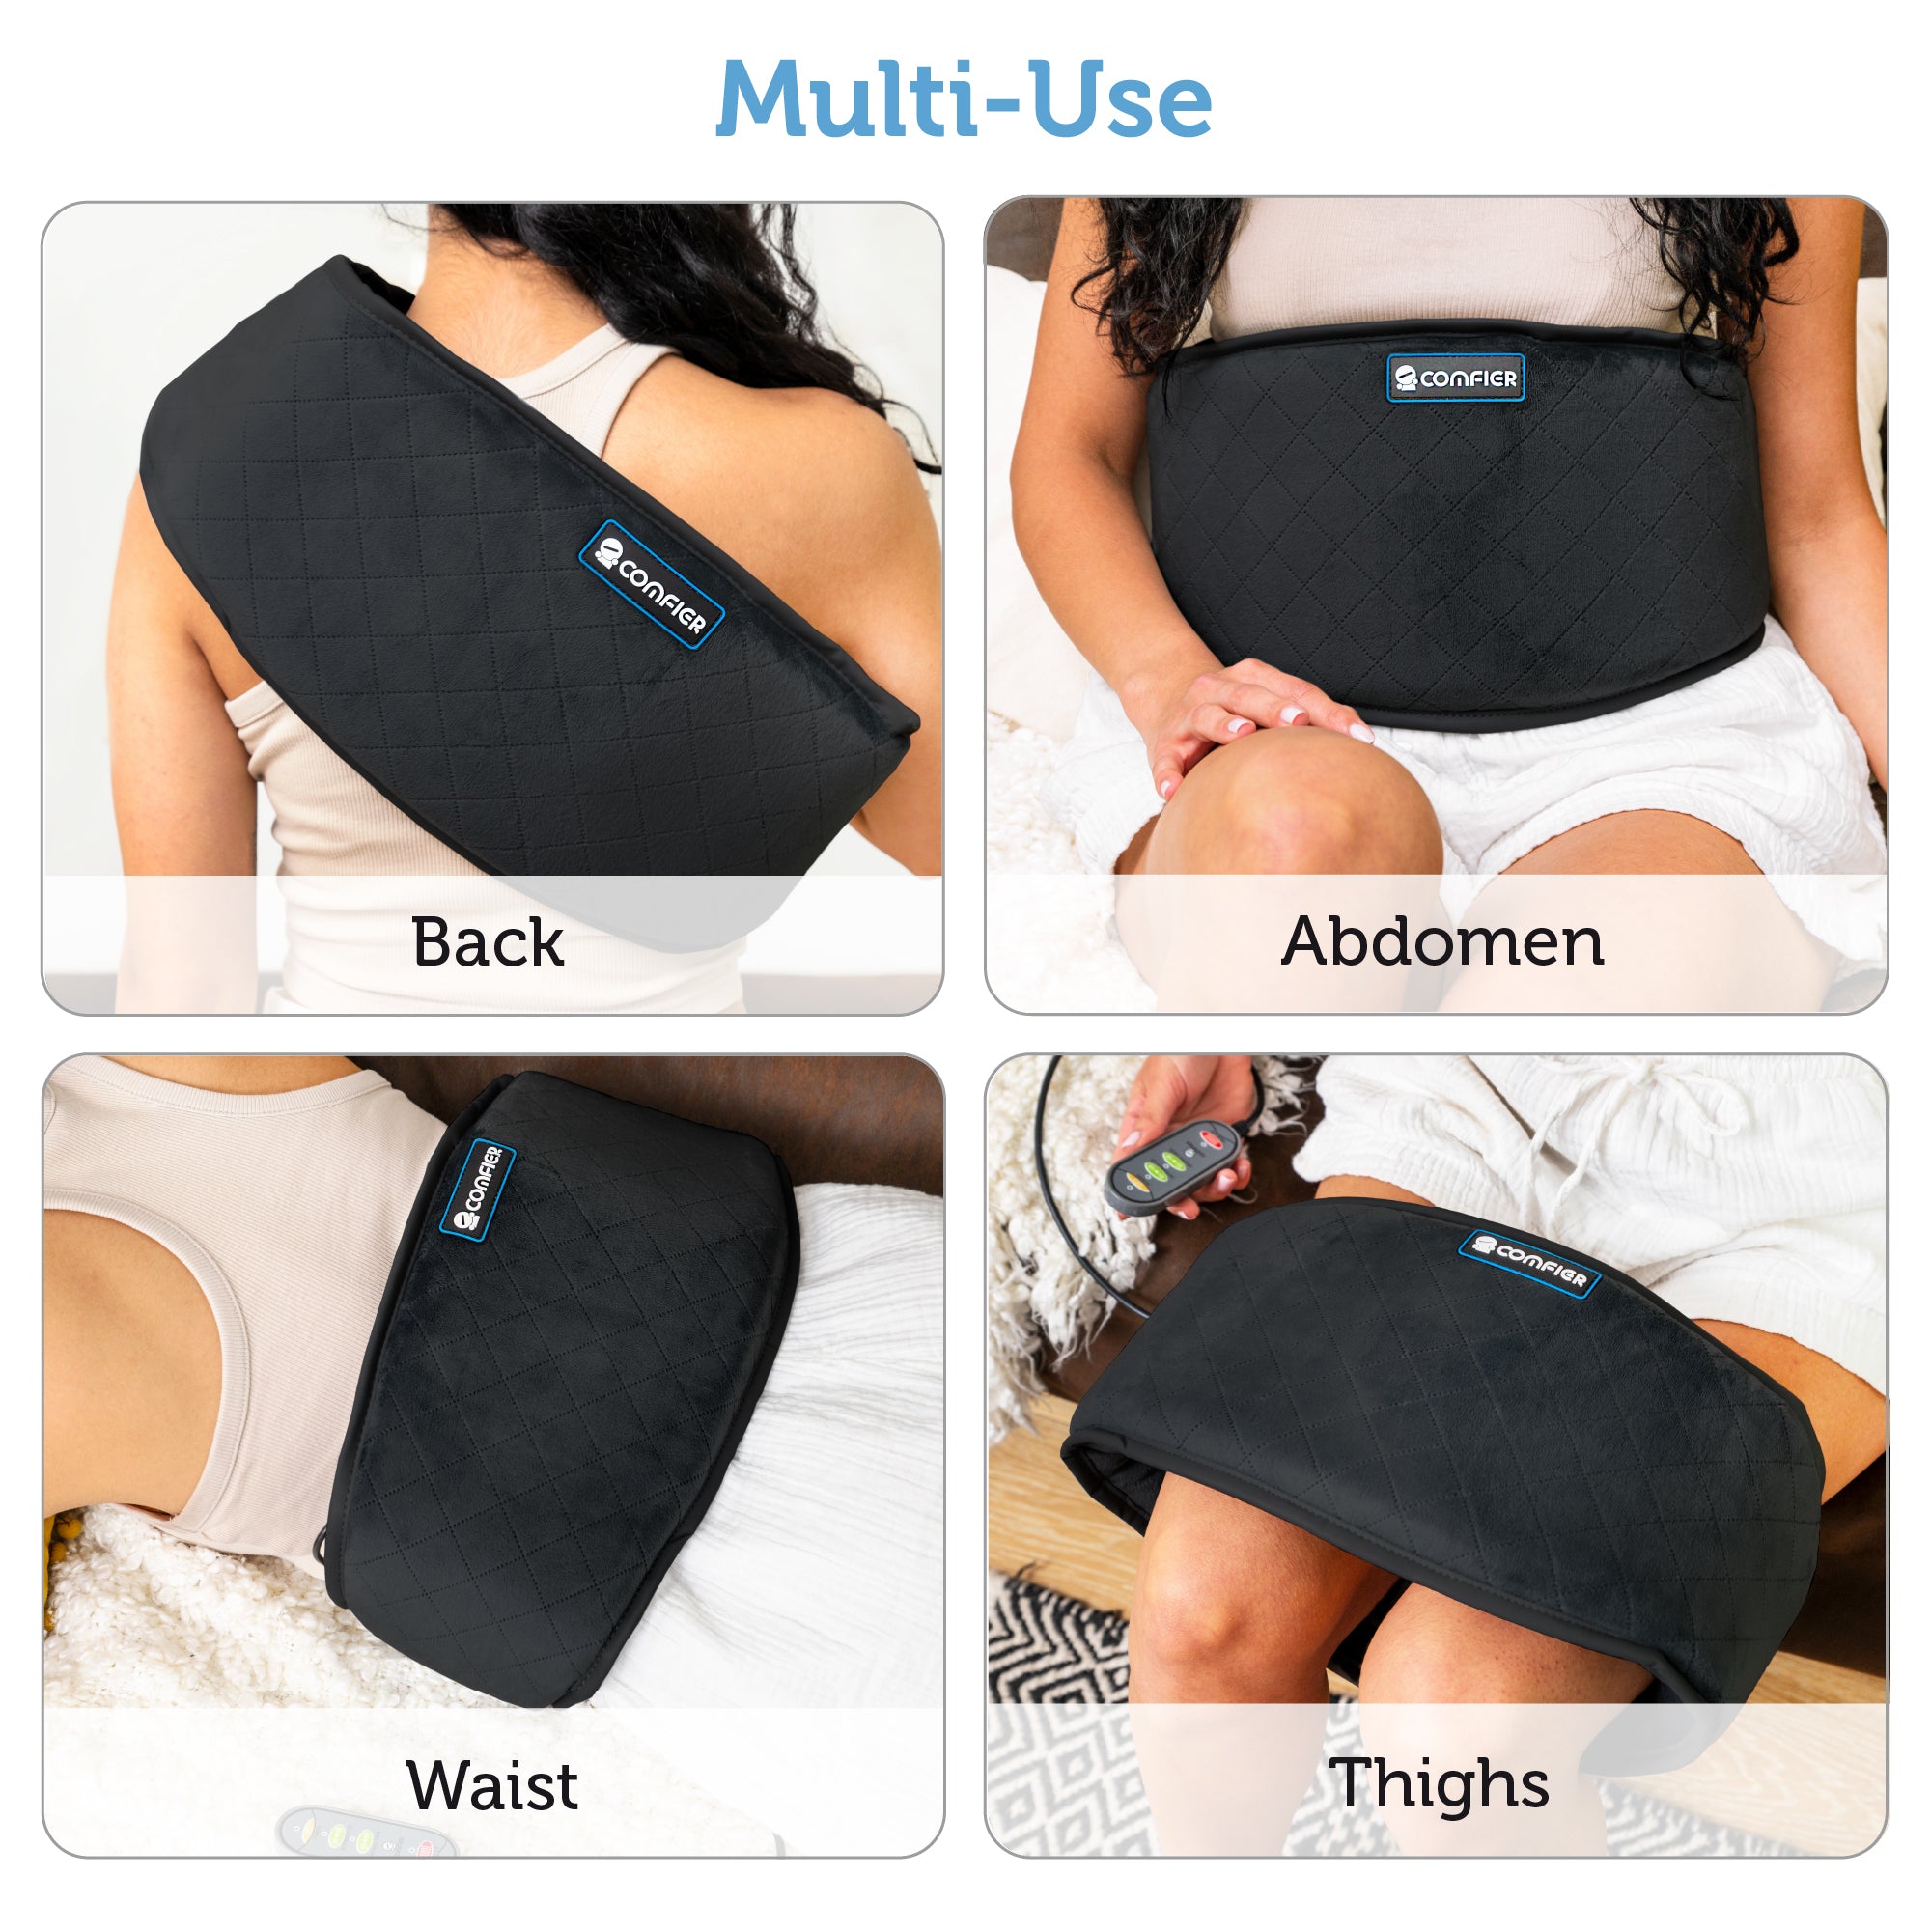  COMFIER Heating Pad for Back Pain - Heat Belly Wrap Belt with  Vibration Massage, Fast Heating Pads with Auto Shut Off, for Lumbar,  Abdominal, Leg Cramps Arthritic Pain Relief, Gifts for